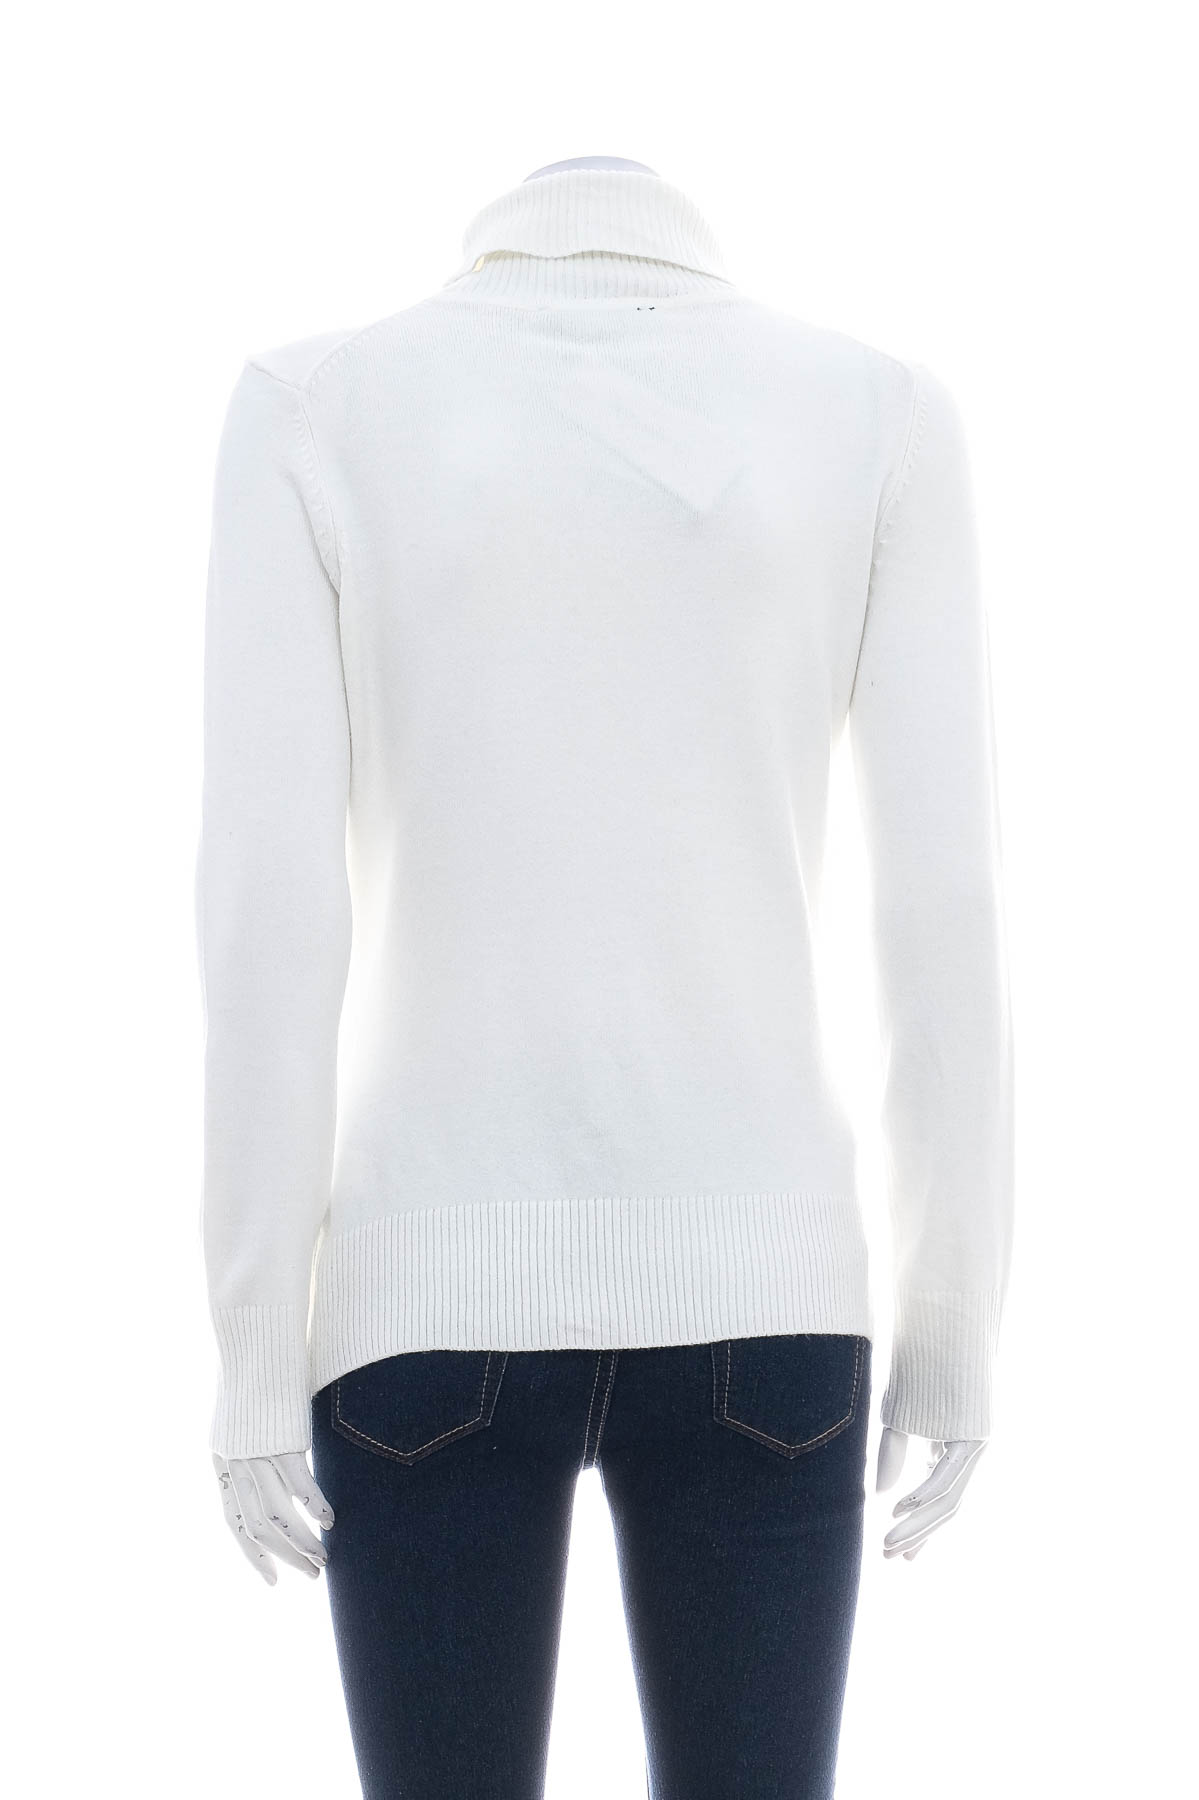 Women's sweater - French Connection - 1